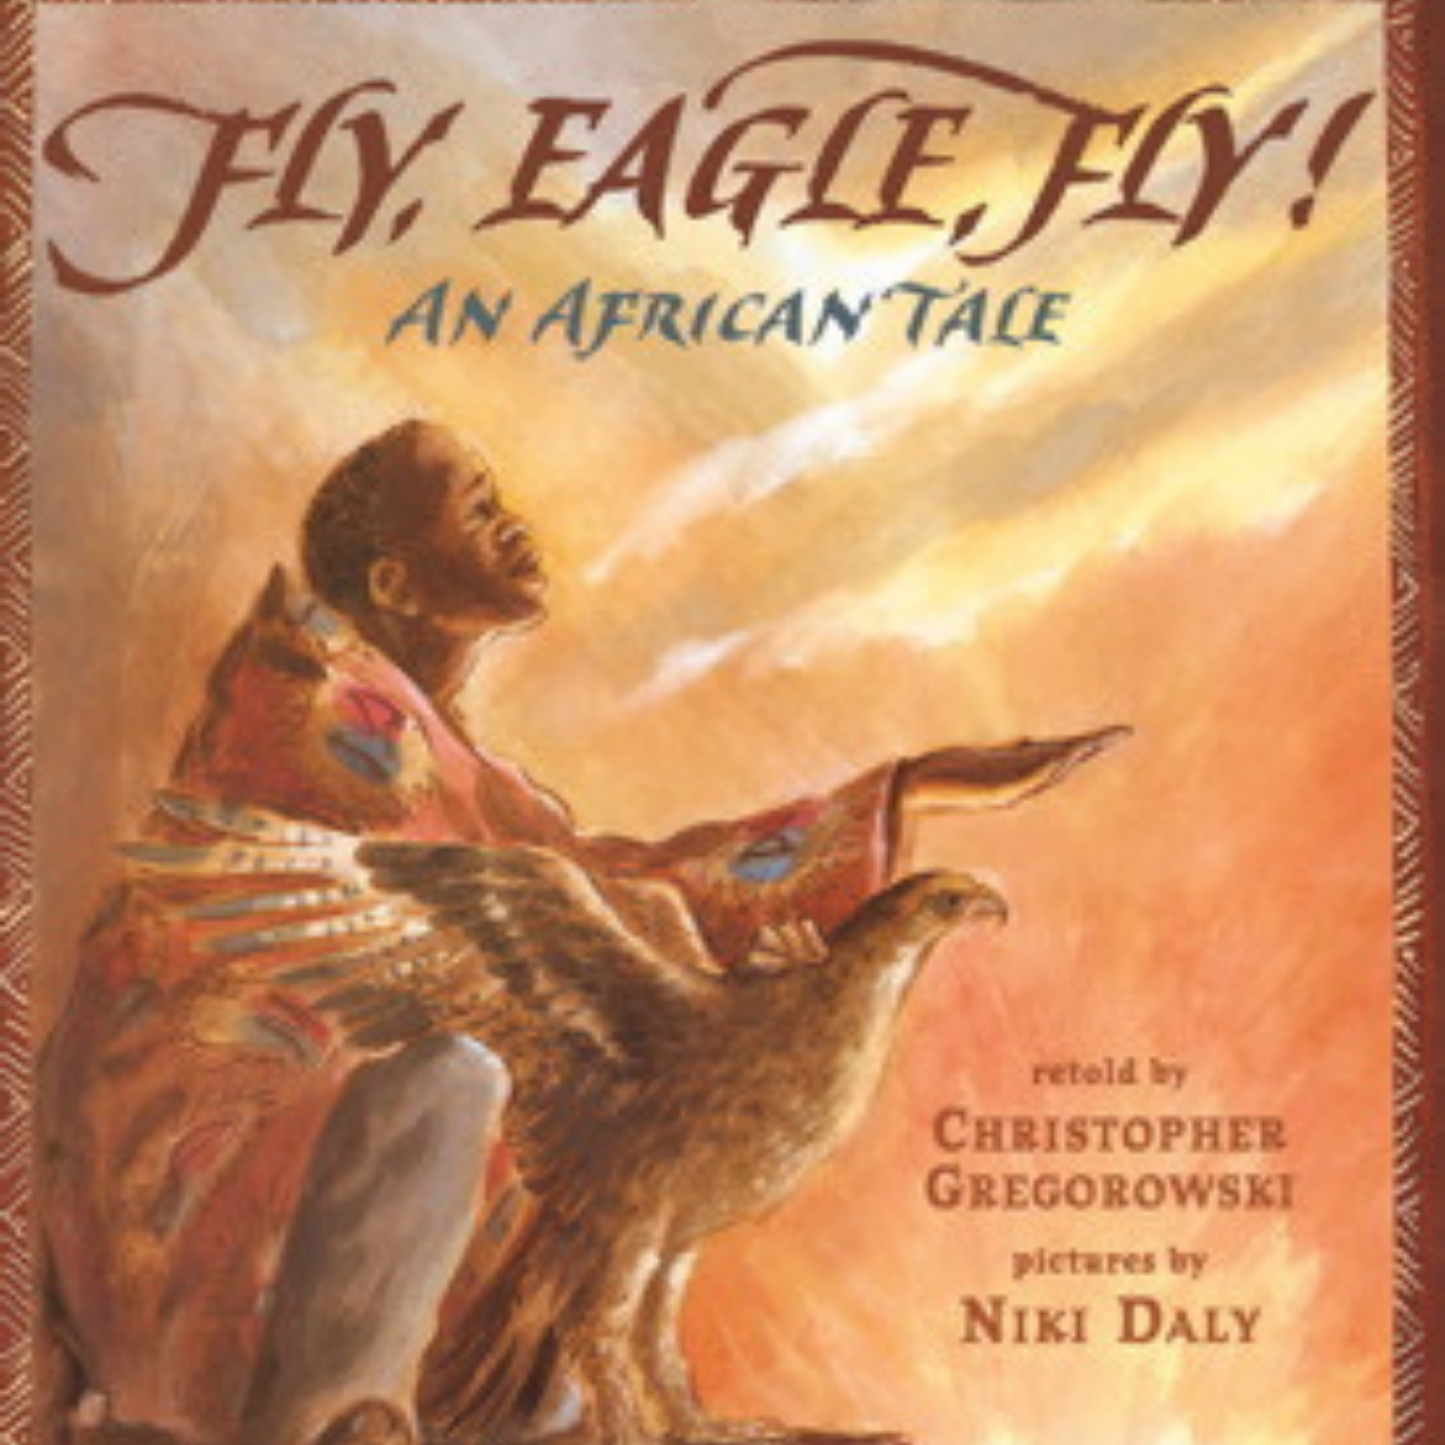 Fly, Eagle Fly: An African Tale